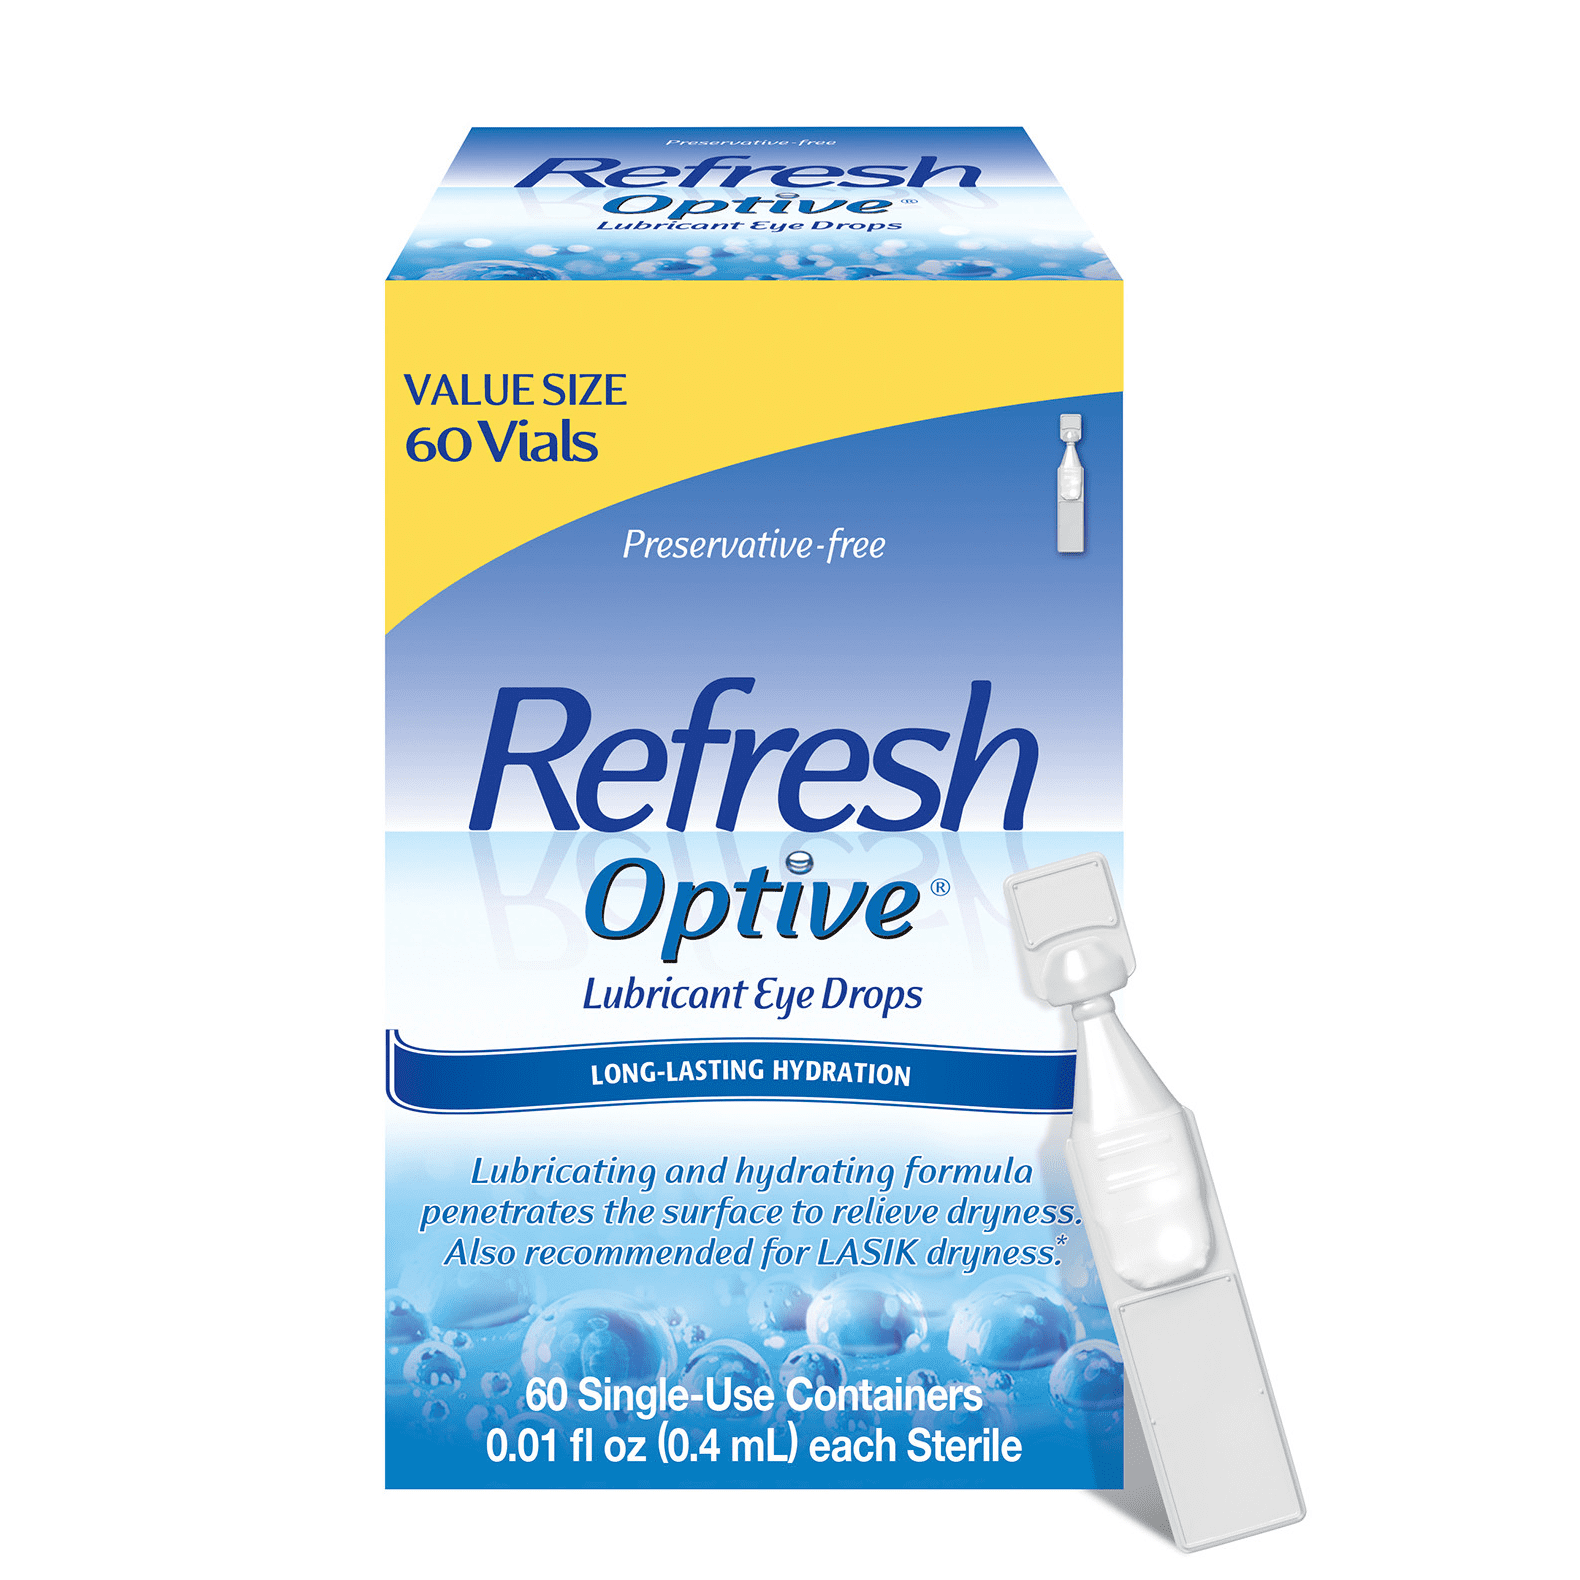 Refresh Optive Lubricant Eye Drops Non-Preserved Tears, 60 Single-Use Containers, 0.4 mL